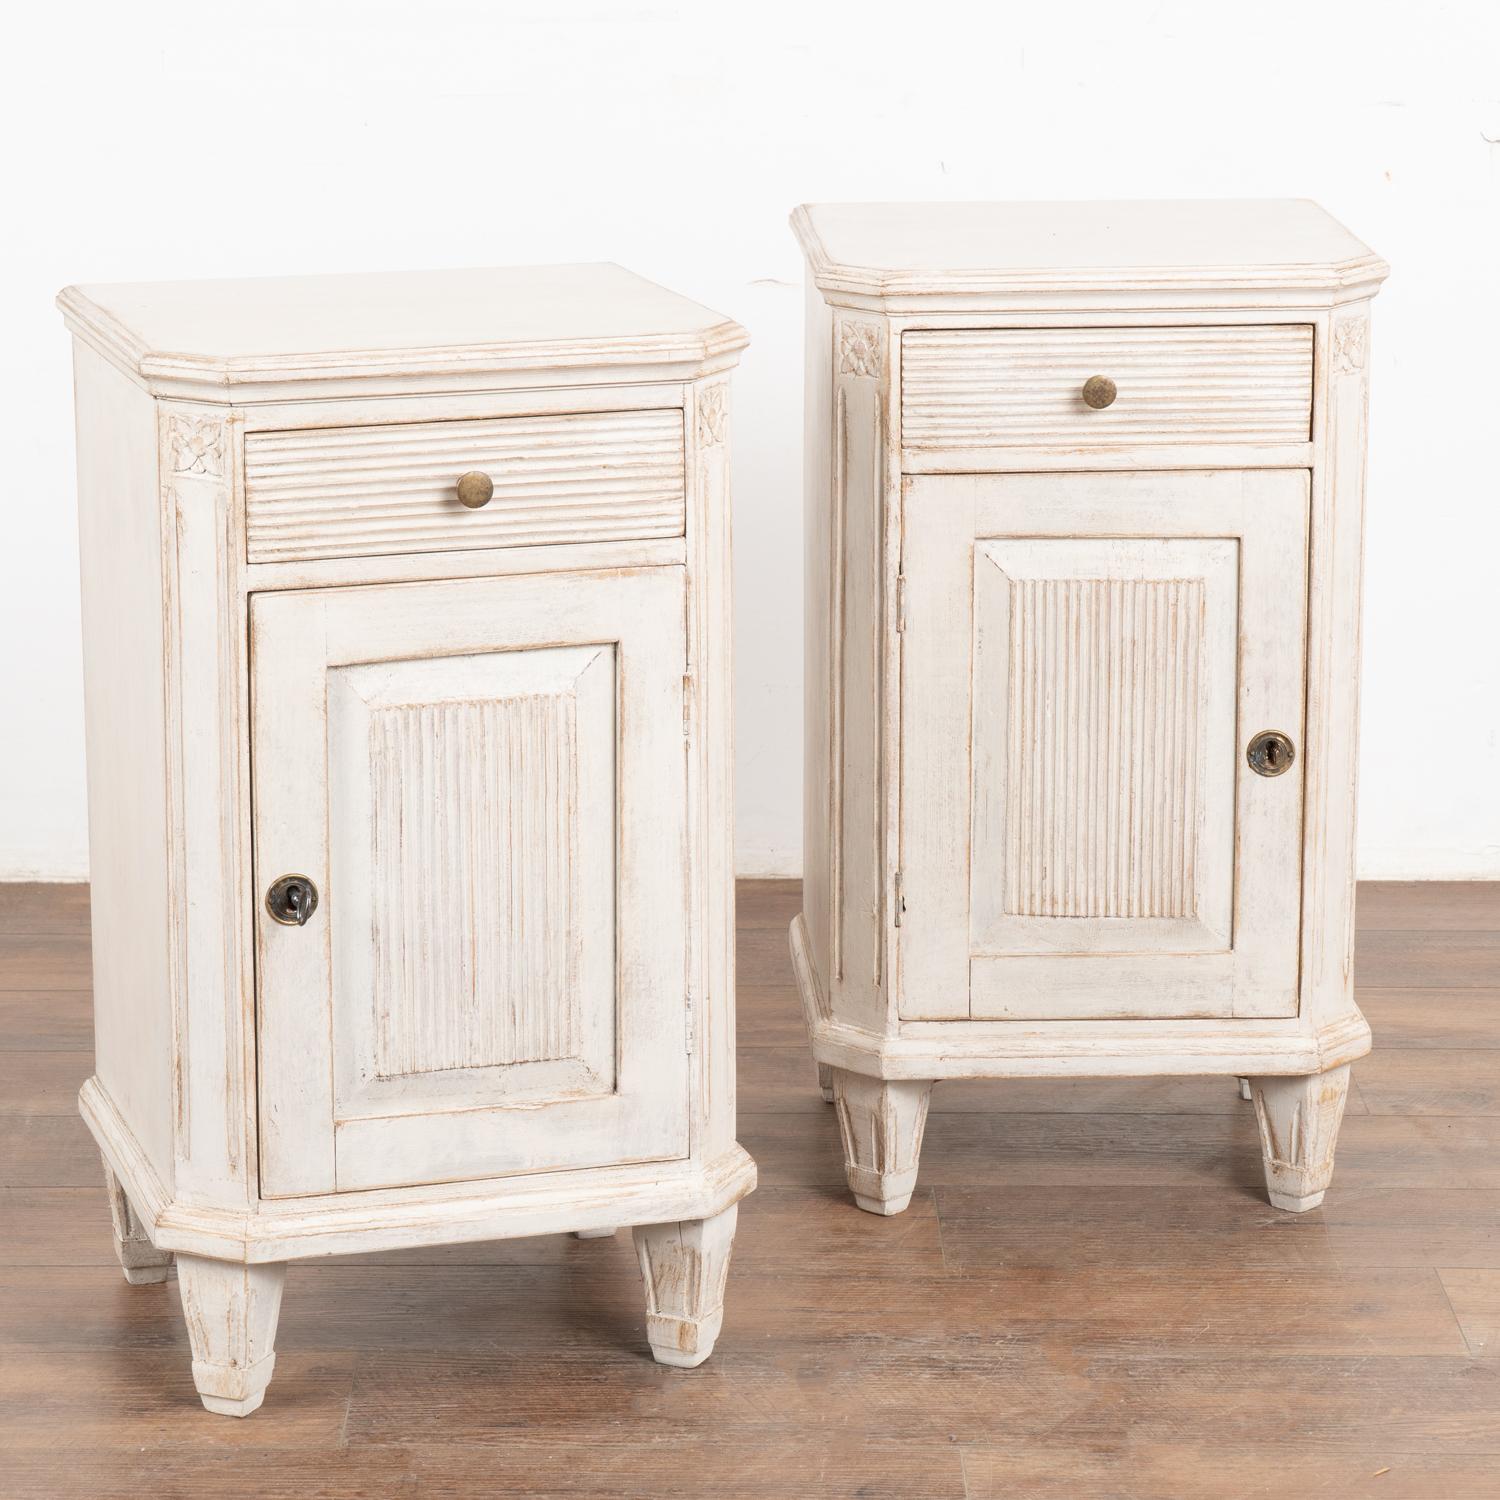 Pair, small Swedish country Gustavian style white painted nightstands or small cabinets standing on tapered feet.
Canted sides have simple fluted carving topped with floral medallion. Fluted carving accents the doors and drawers as well. 
Newer